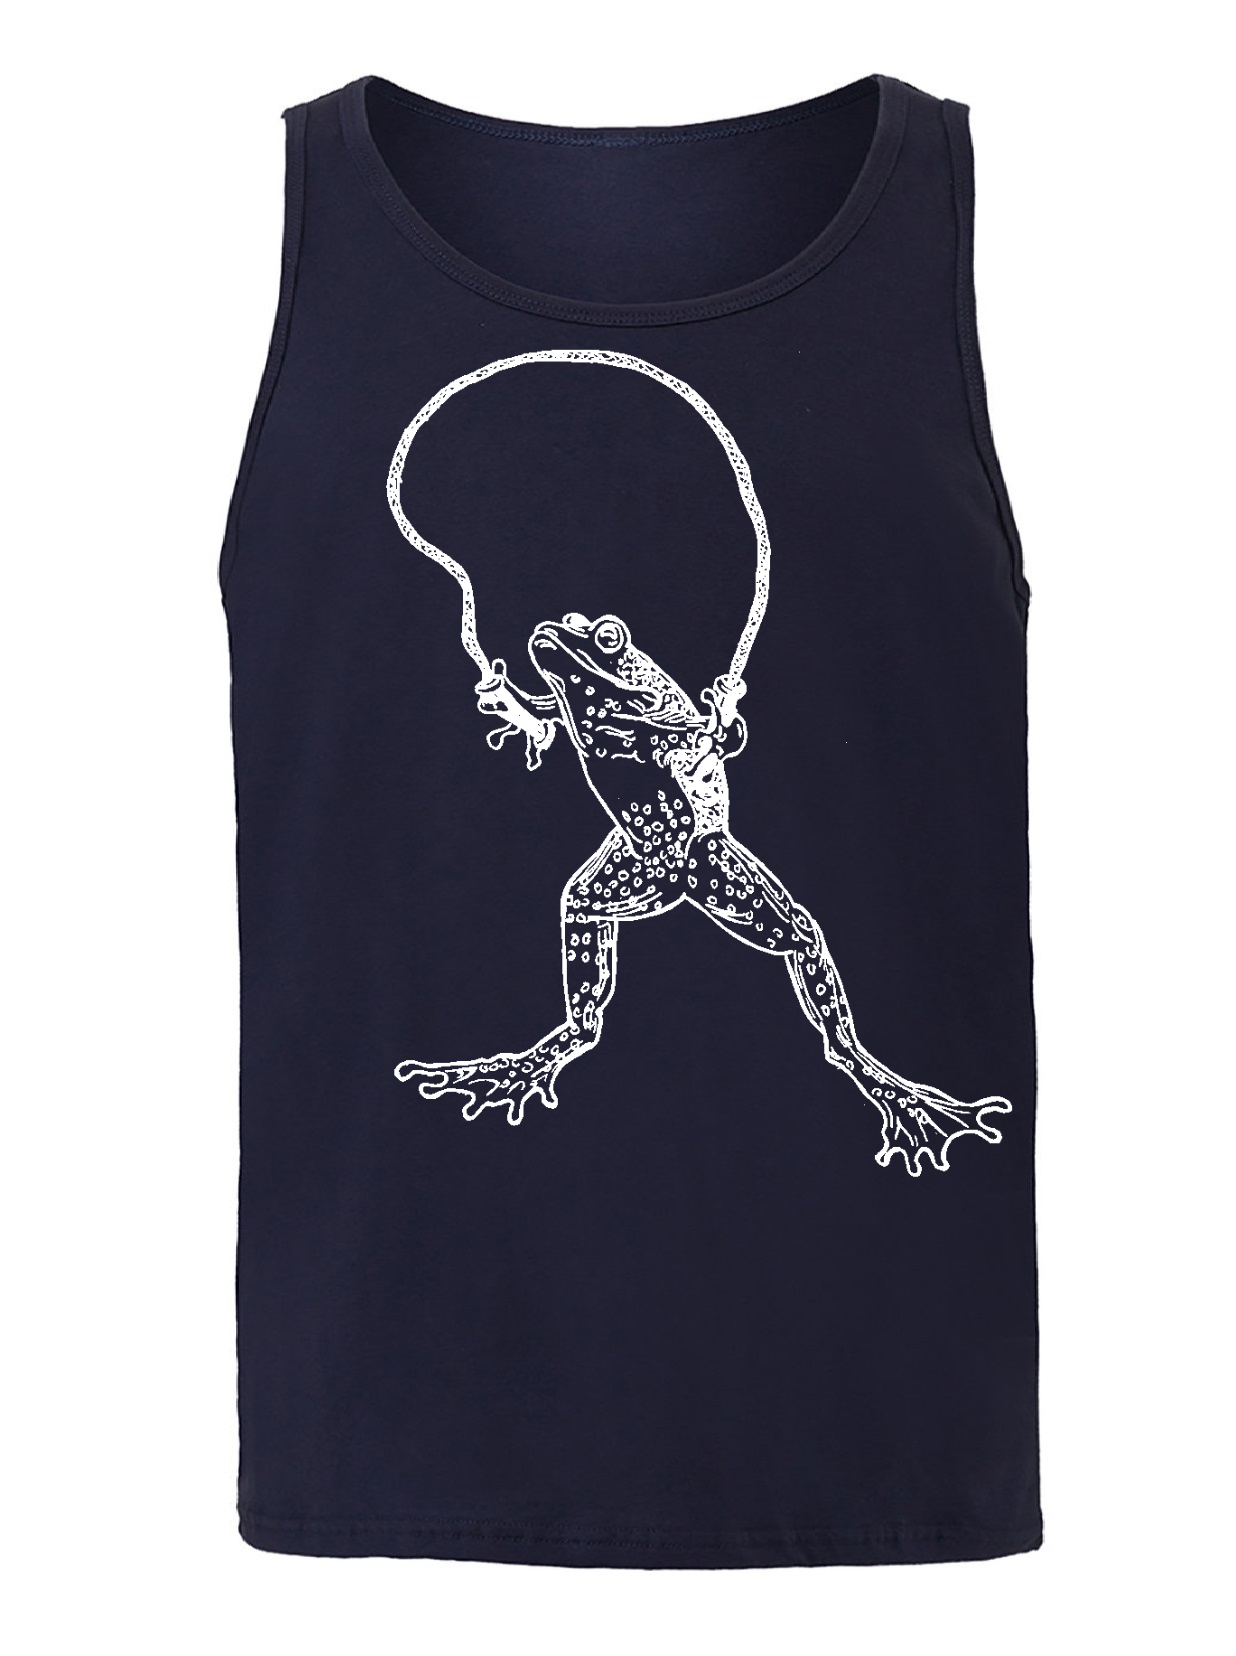 Jumping Frog Unisex Tank Top